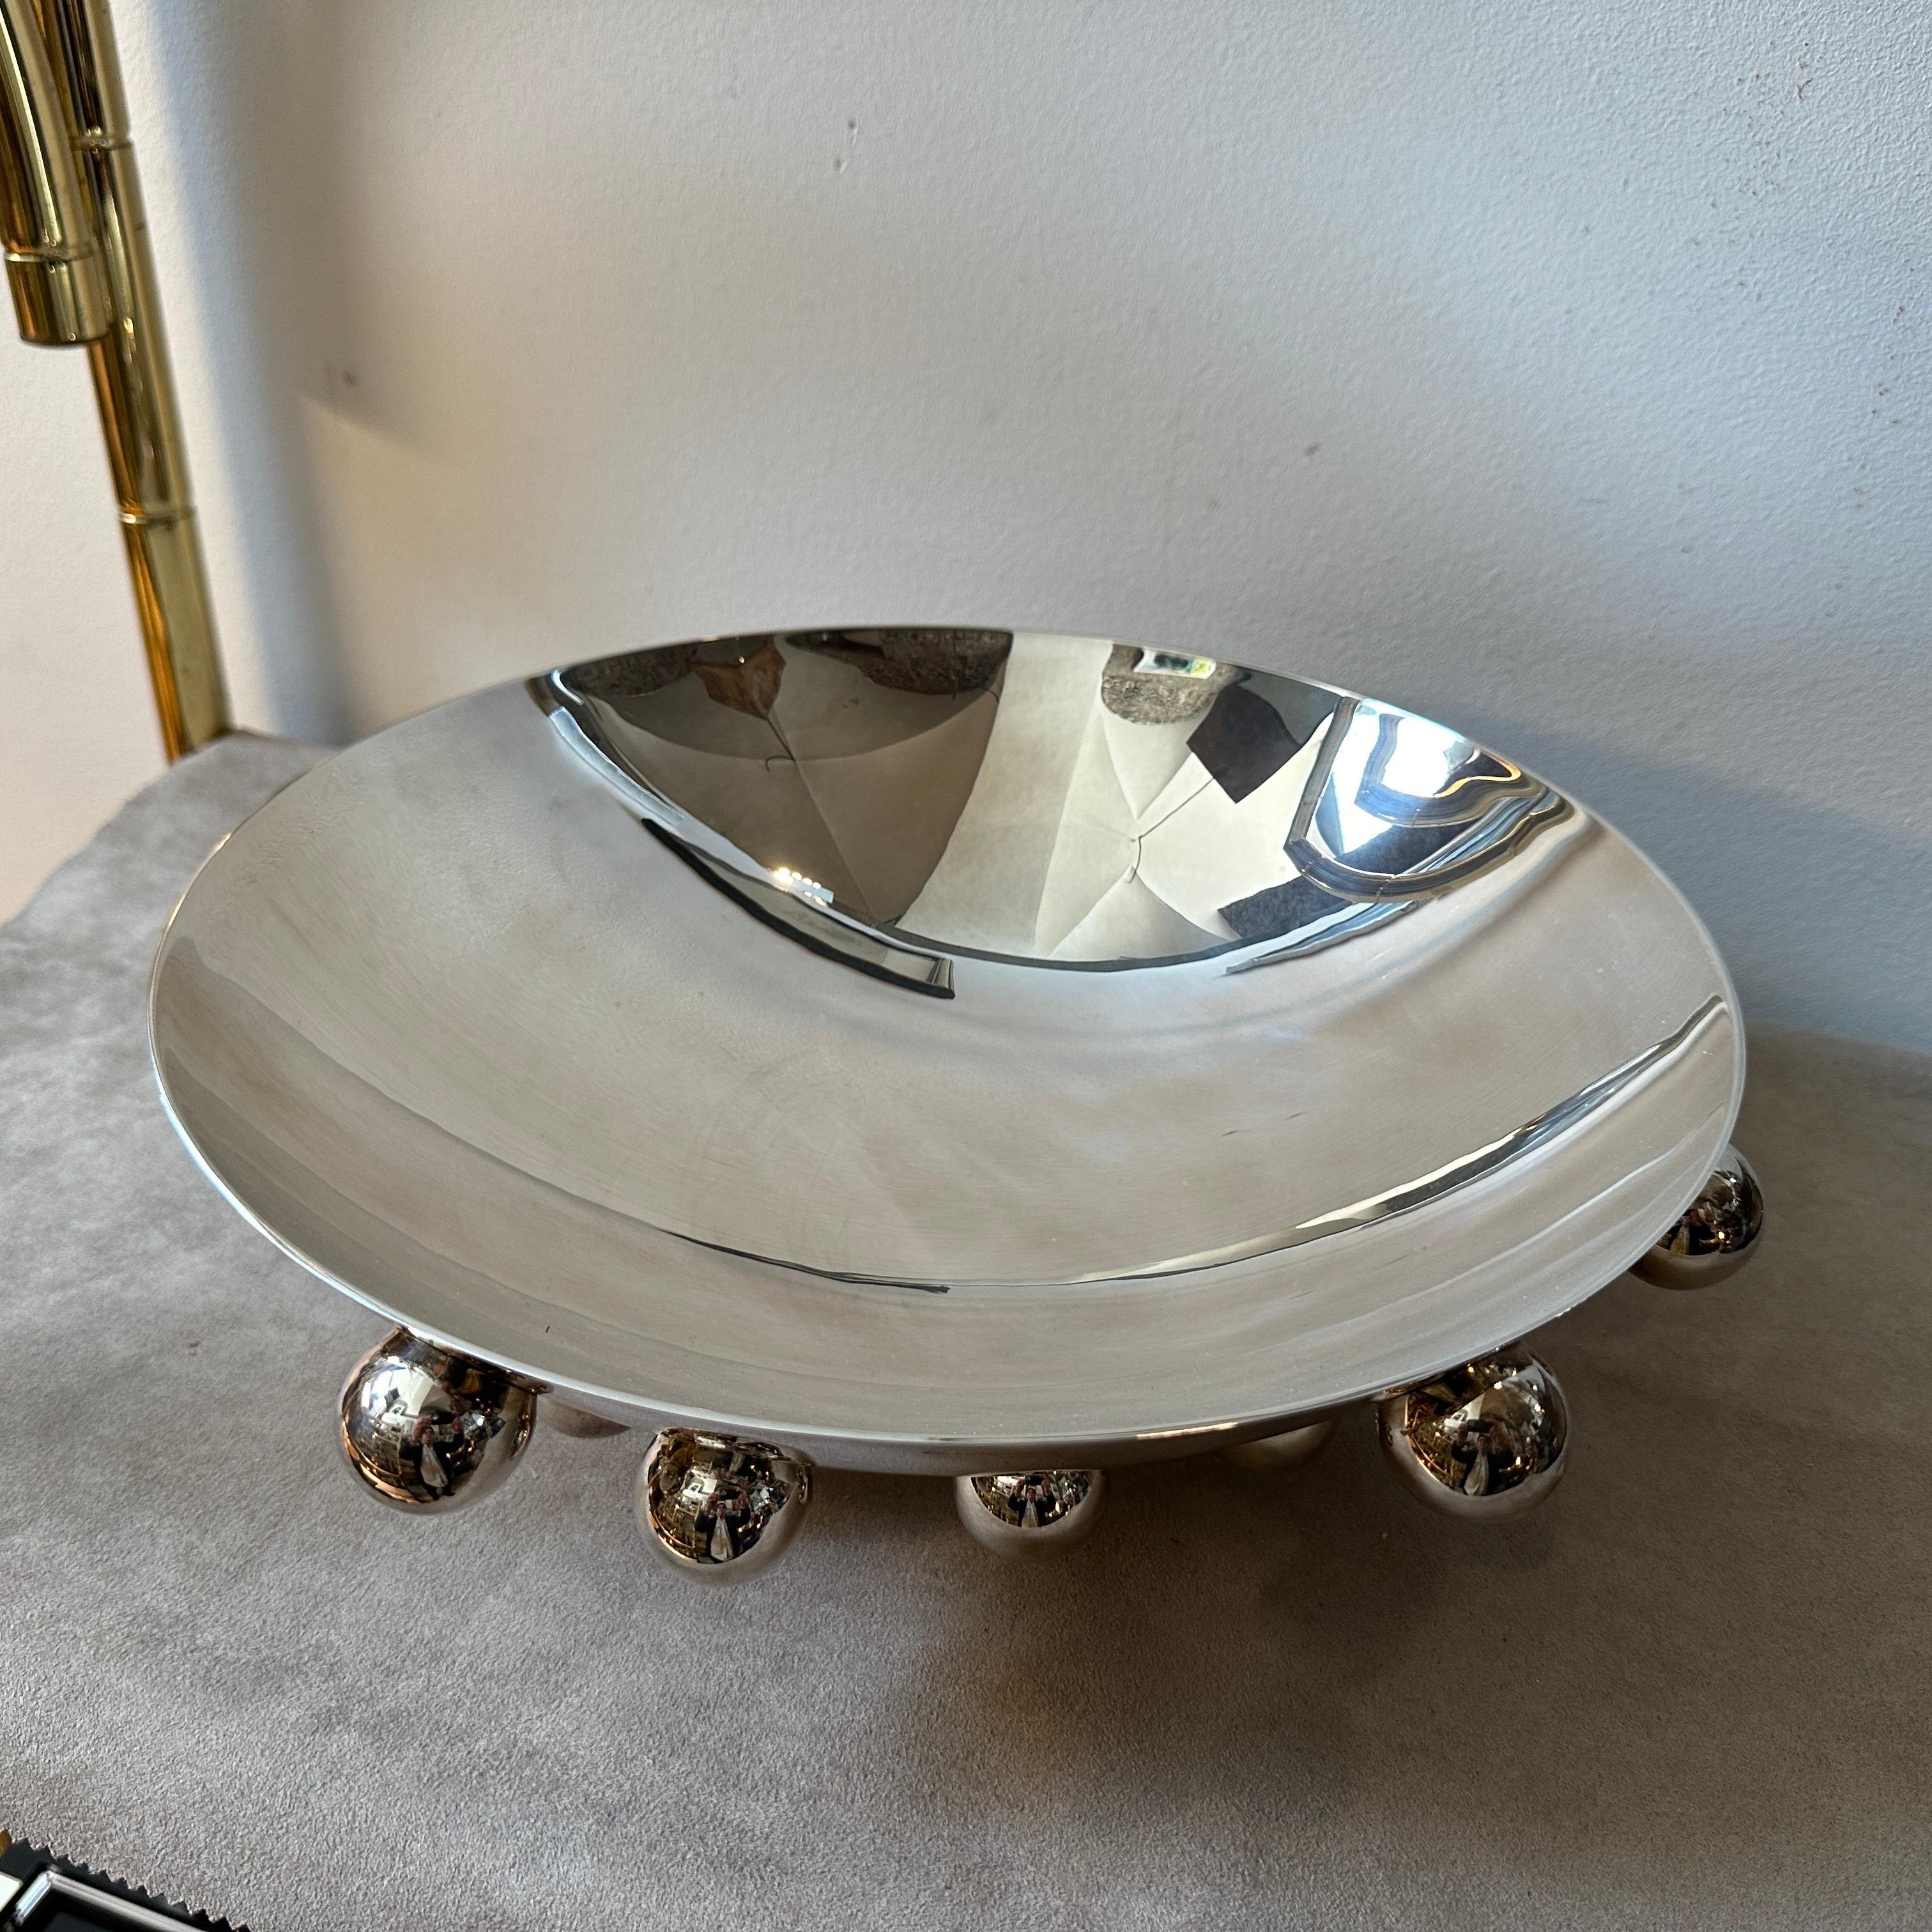 A 1990s Space Age Silver Plated Atomes Bowl By Richard Hutten for Christofle 1